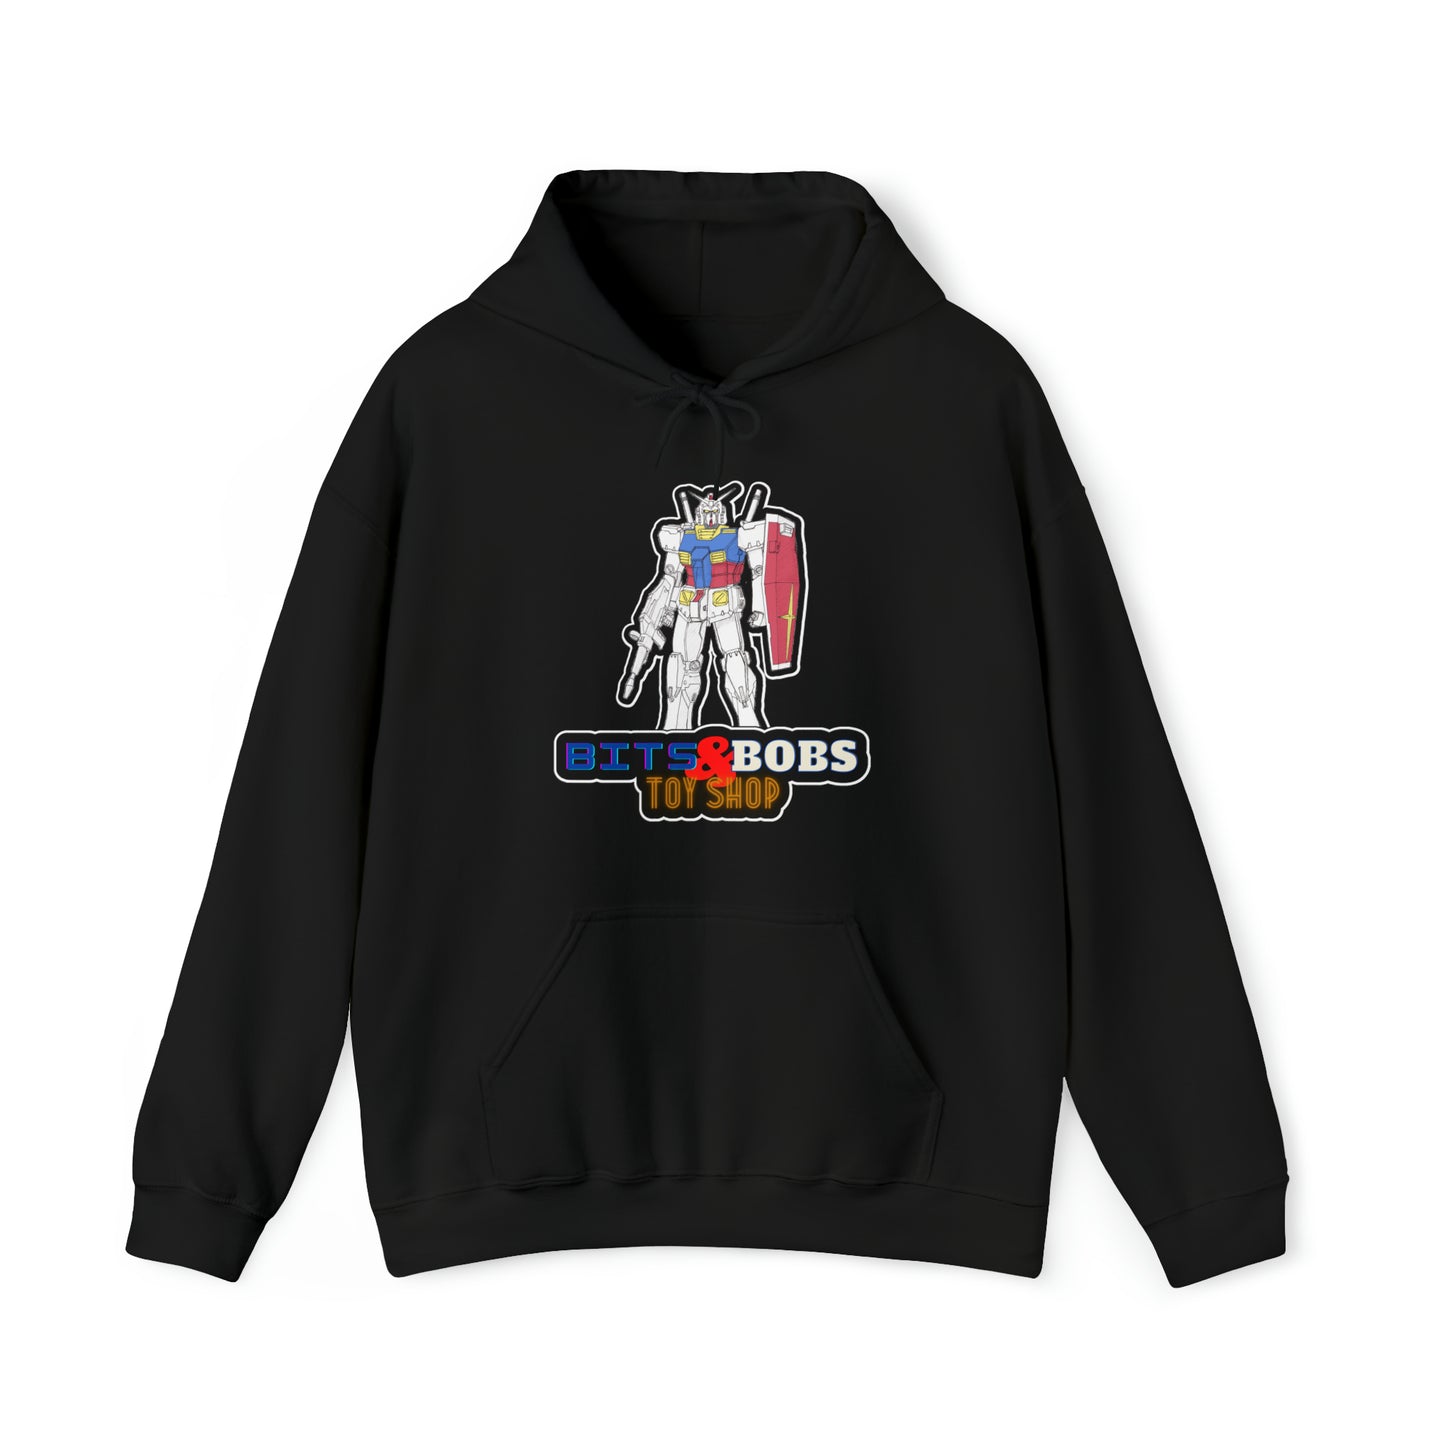 Bits and Bobs hoodie